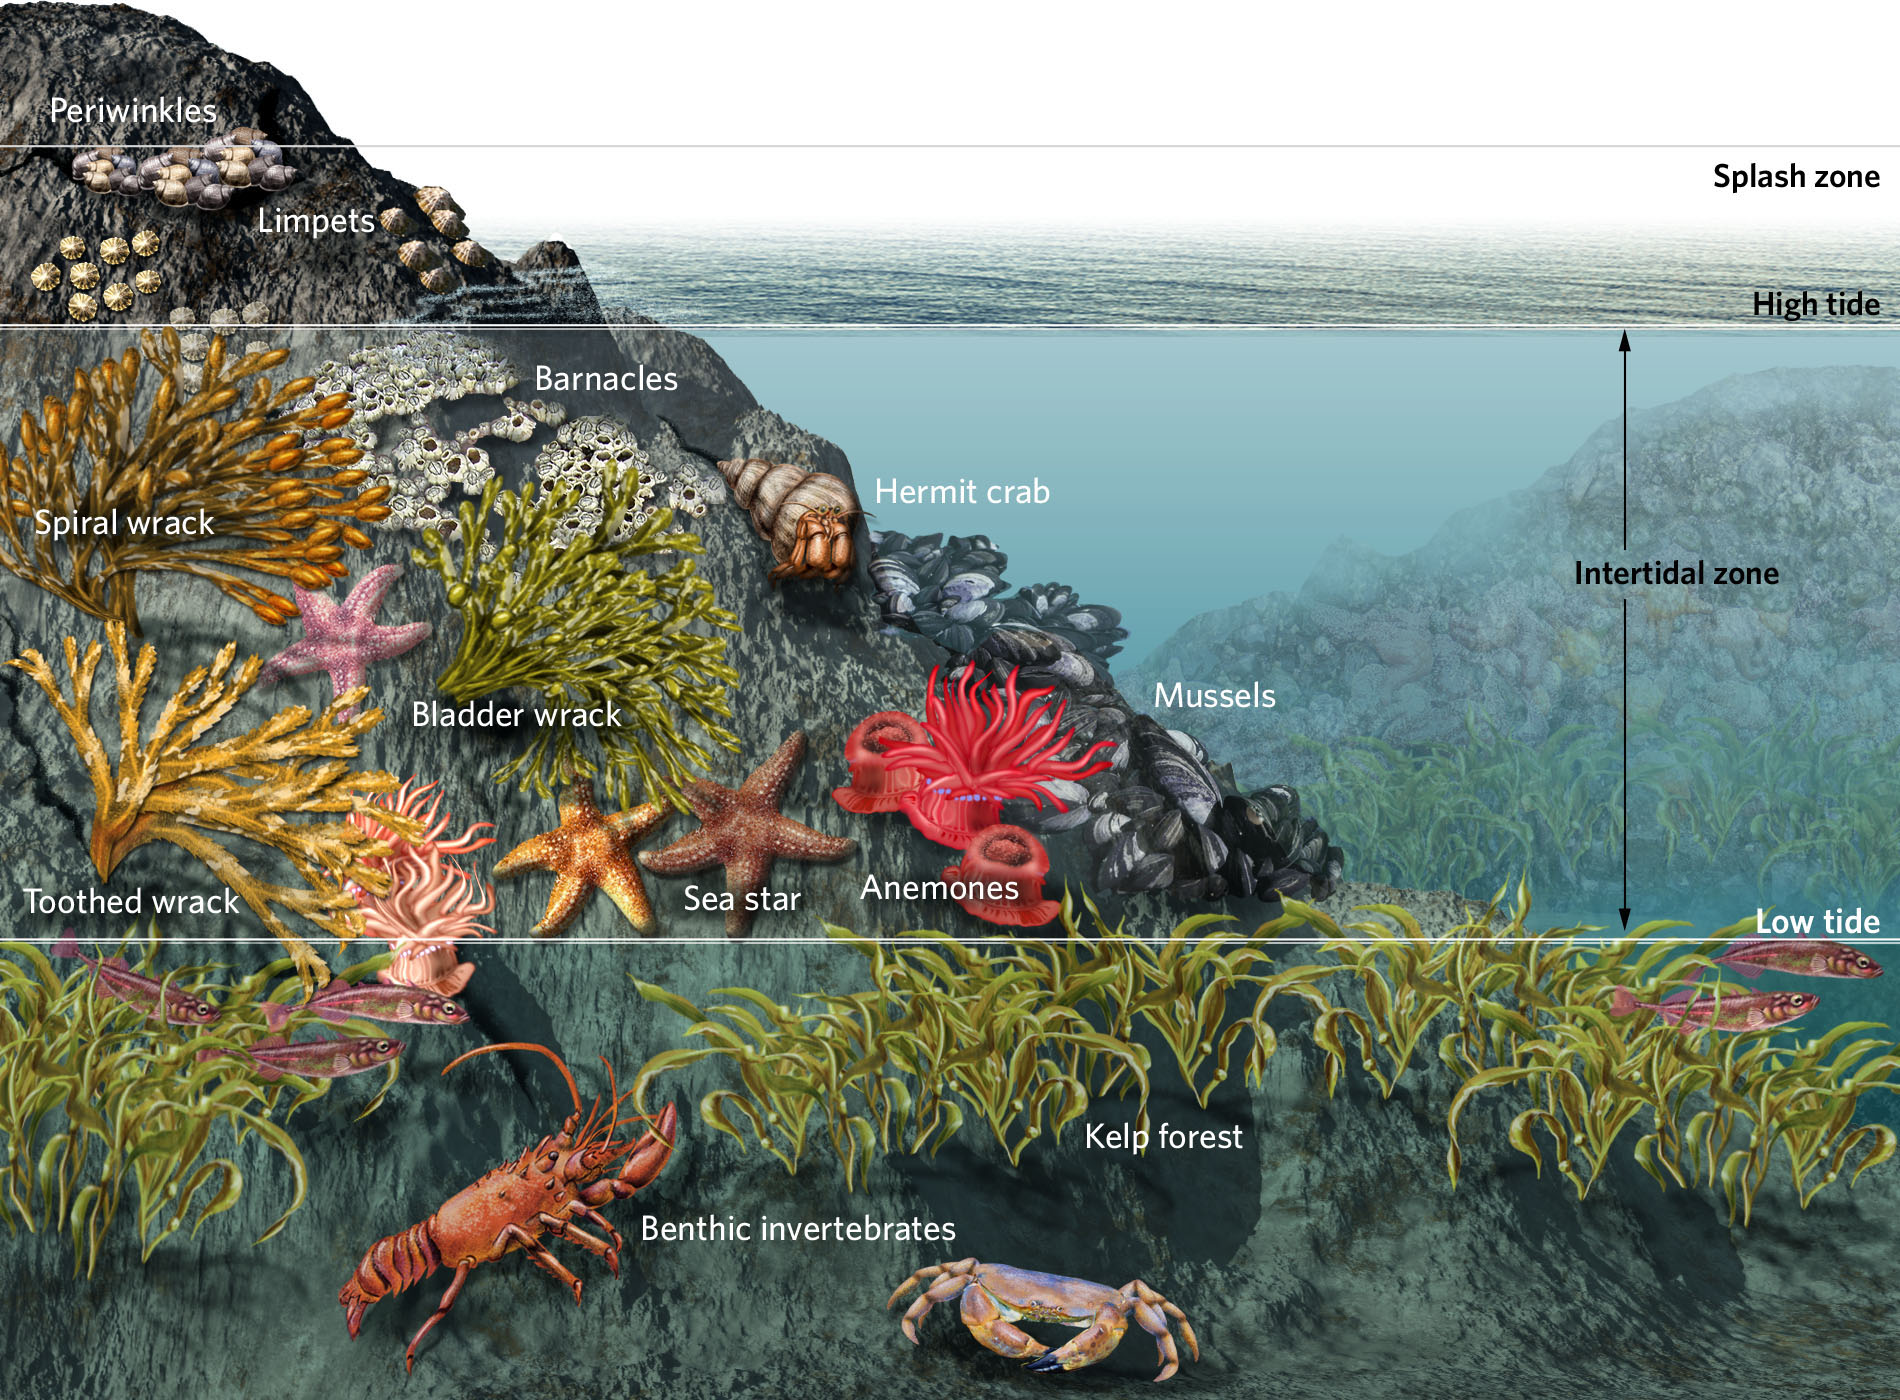 Ocean Ecosystem Drawing at Explore collection of